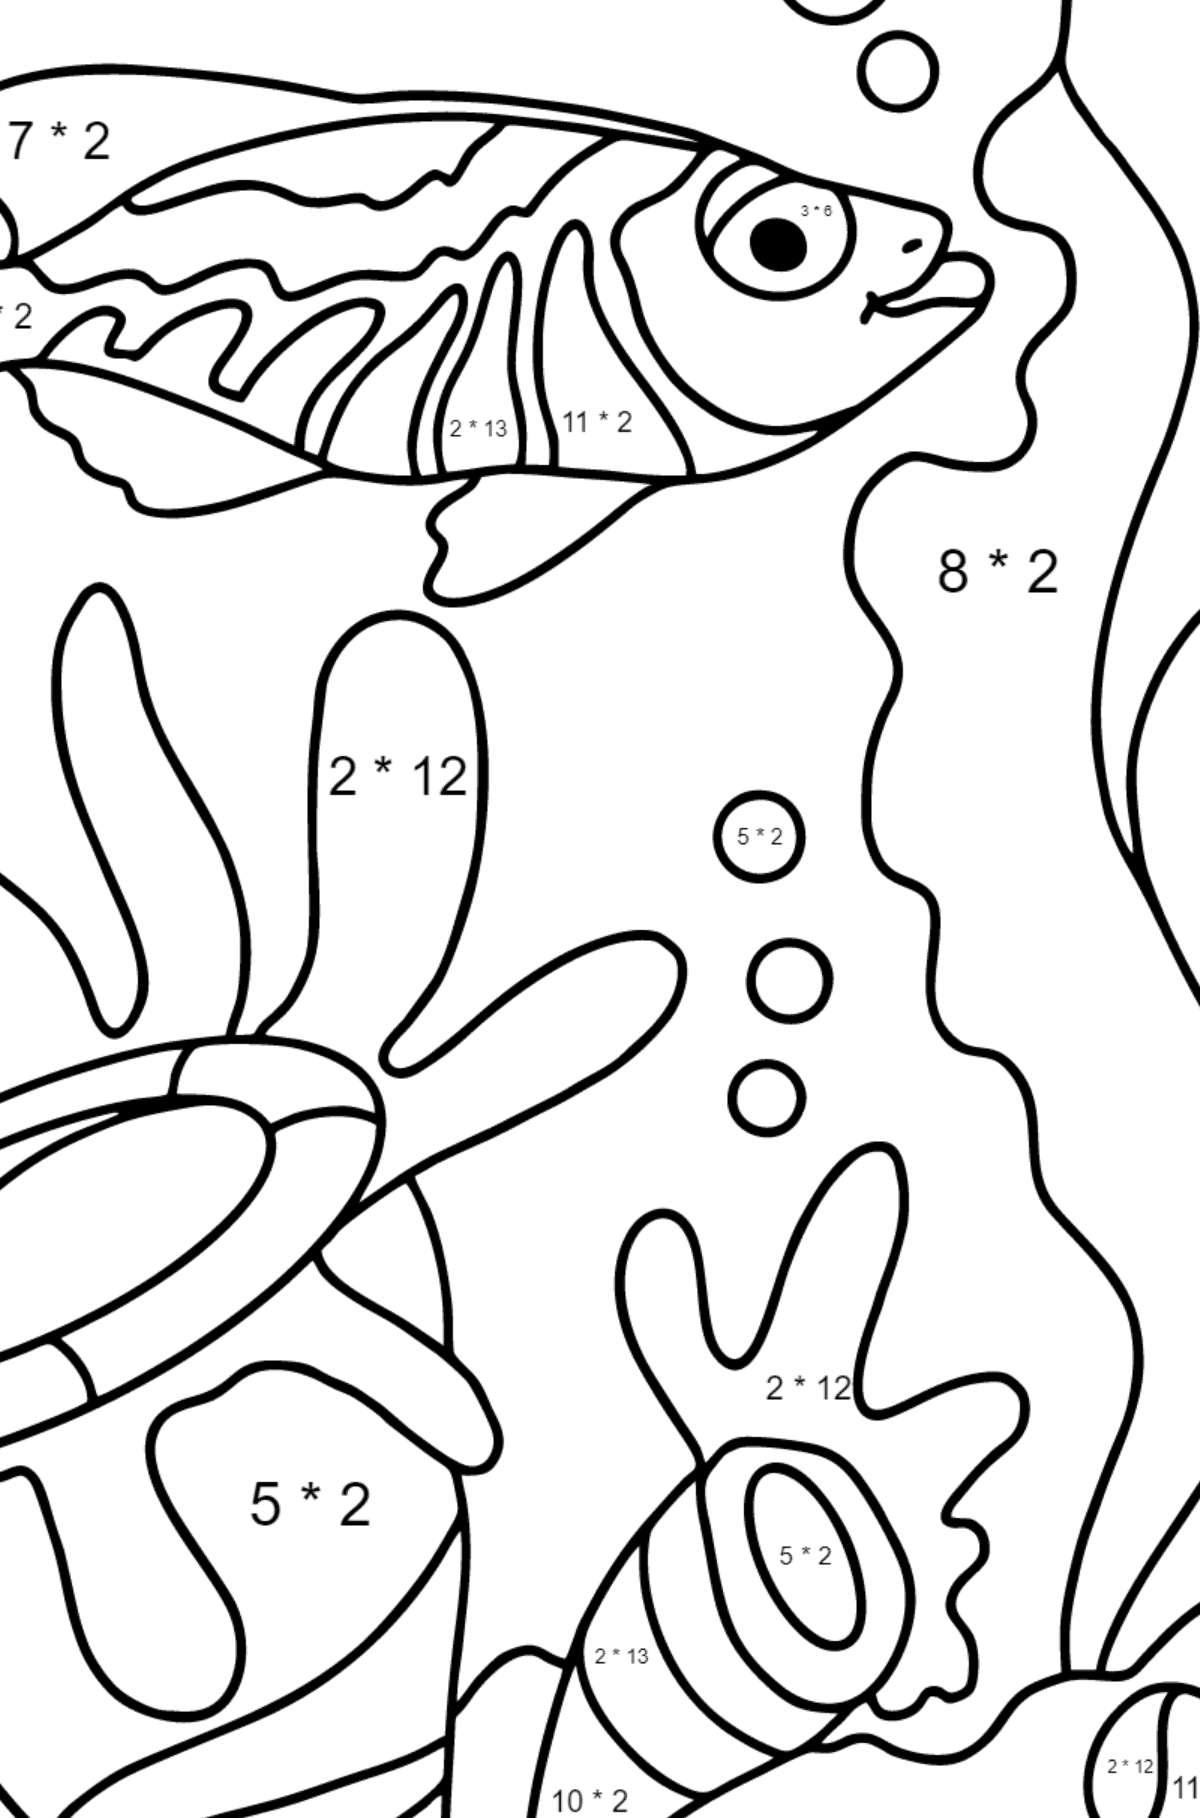 Coloring Page - A Fish is Admiring the Corals - Math Coloring - Multiplication for Kids